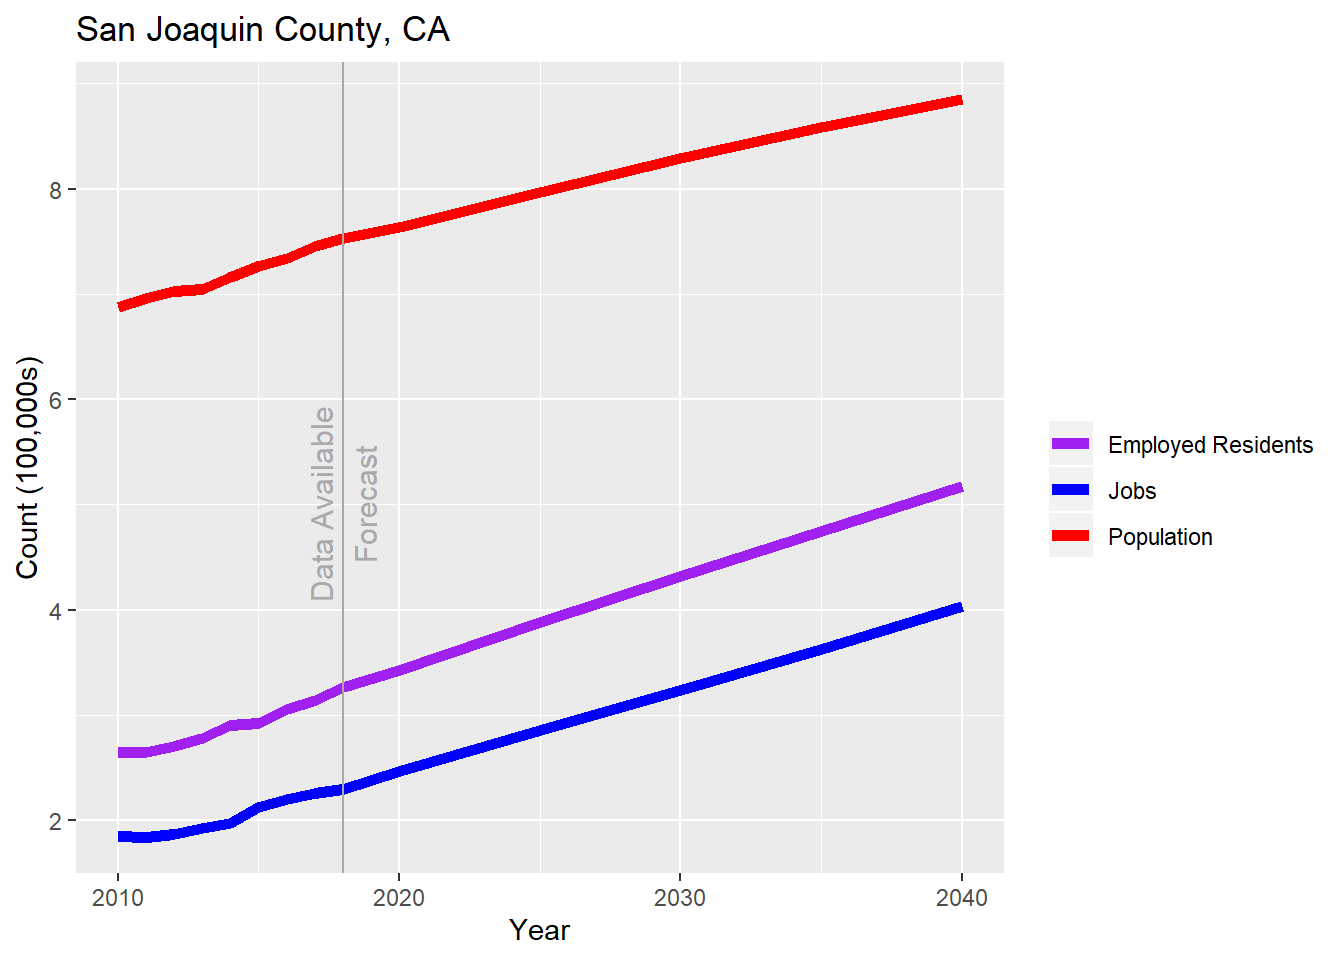 Historical population, employed residents, and jobs for San Joaquin County 2010-2018, followed by projections to 2040.